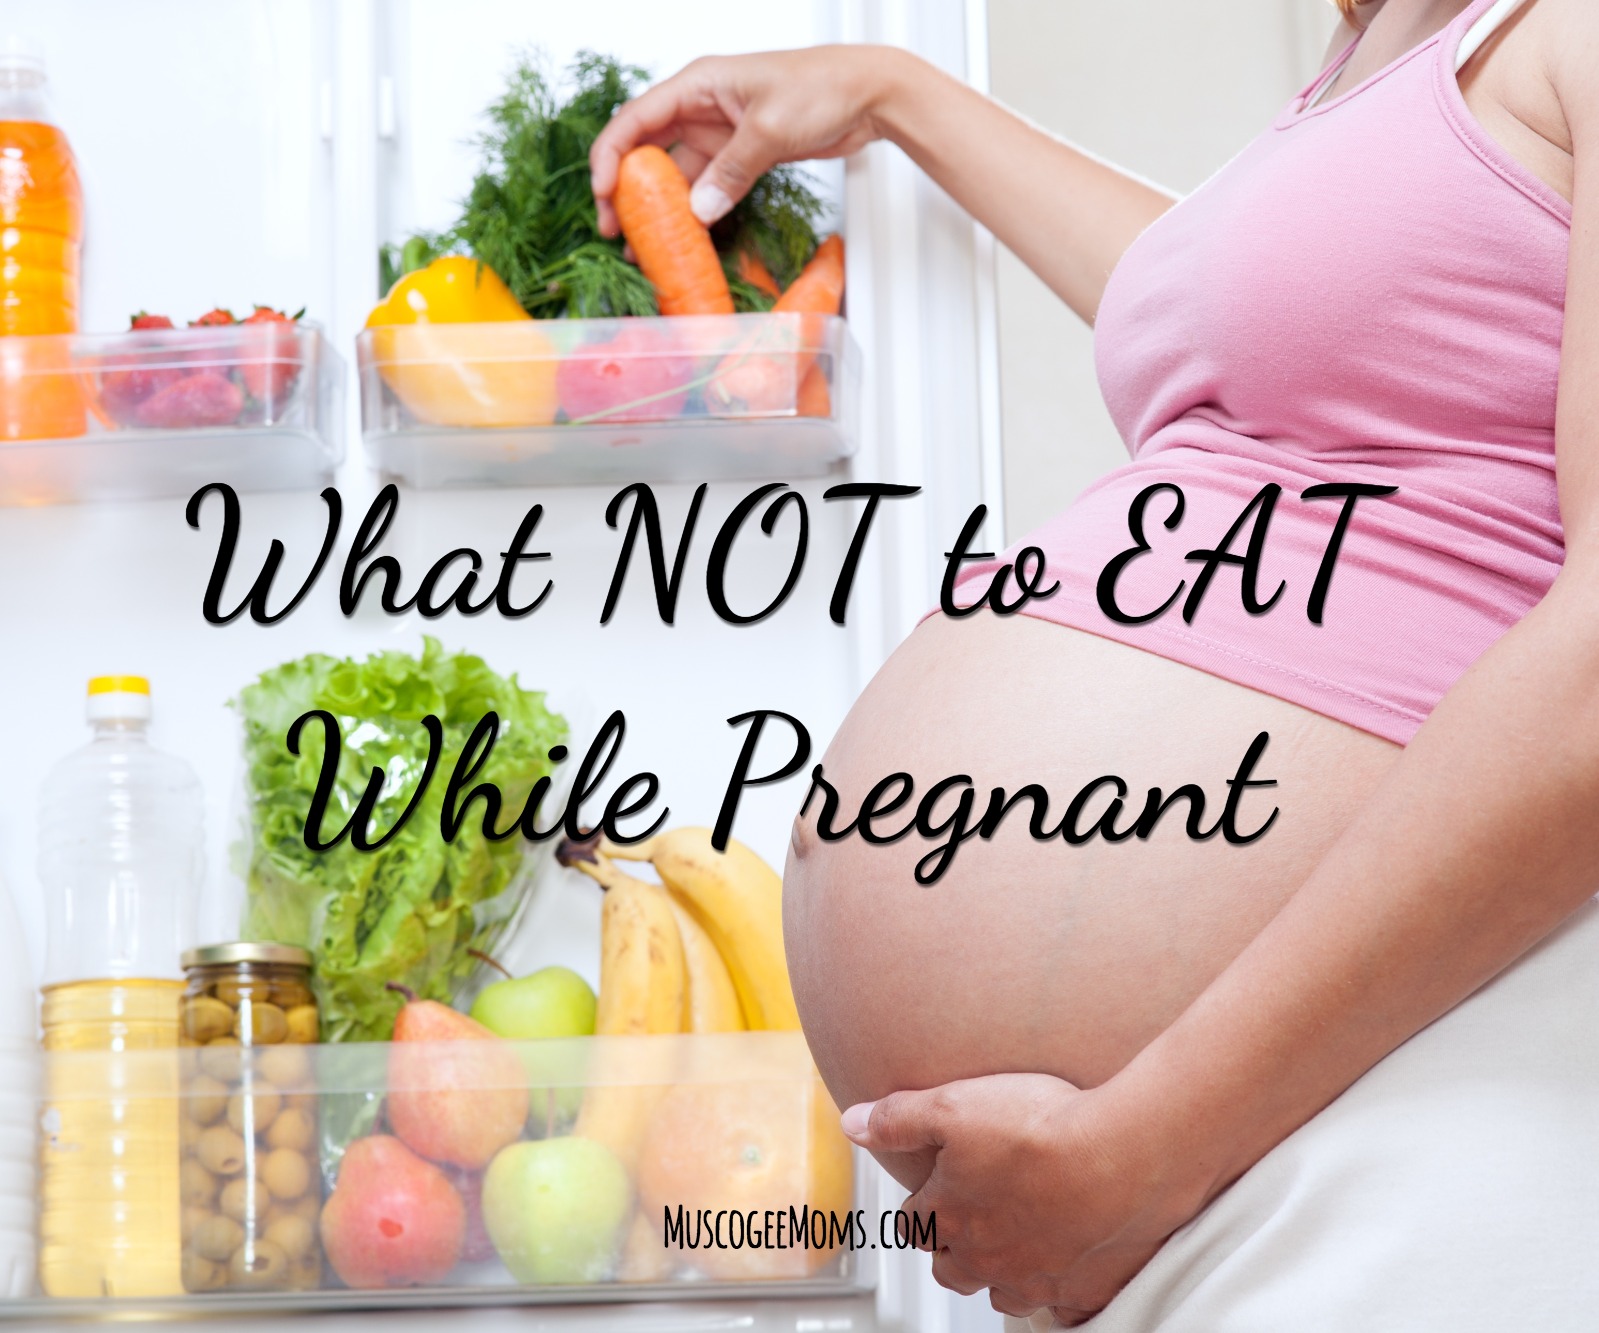 pregnant foods avoid pregnancy healthy should list during eating six daily critical growth editor development note baby muscogeemoms